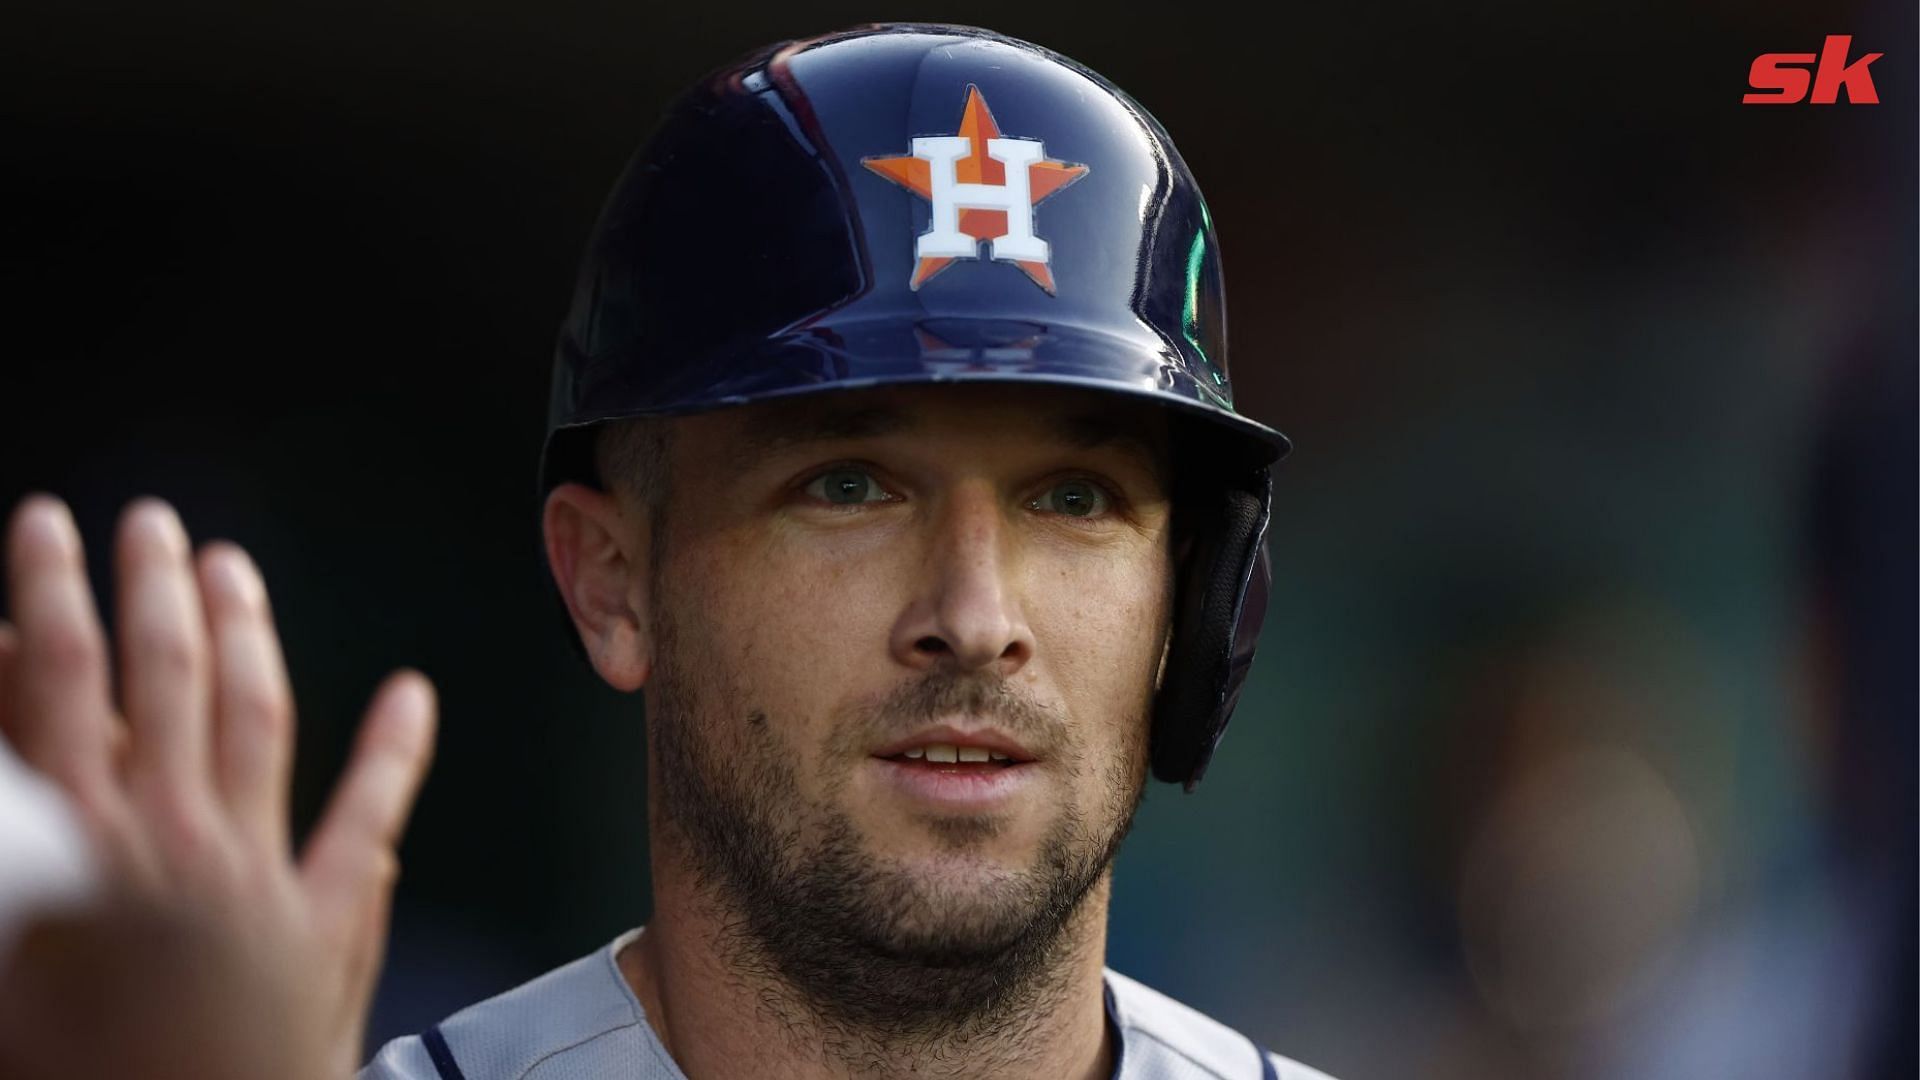 Alex Bregman shares delightful picture treat featuring wife Reagan, baby Knox and heartfelt Mother